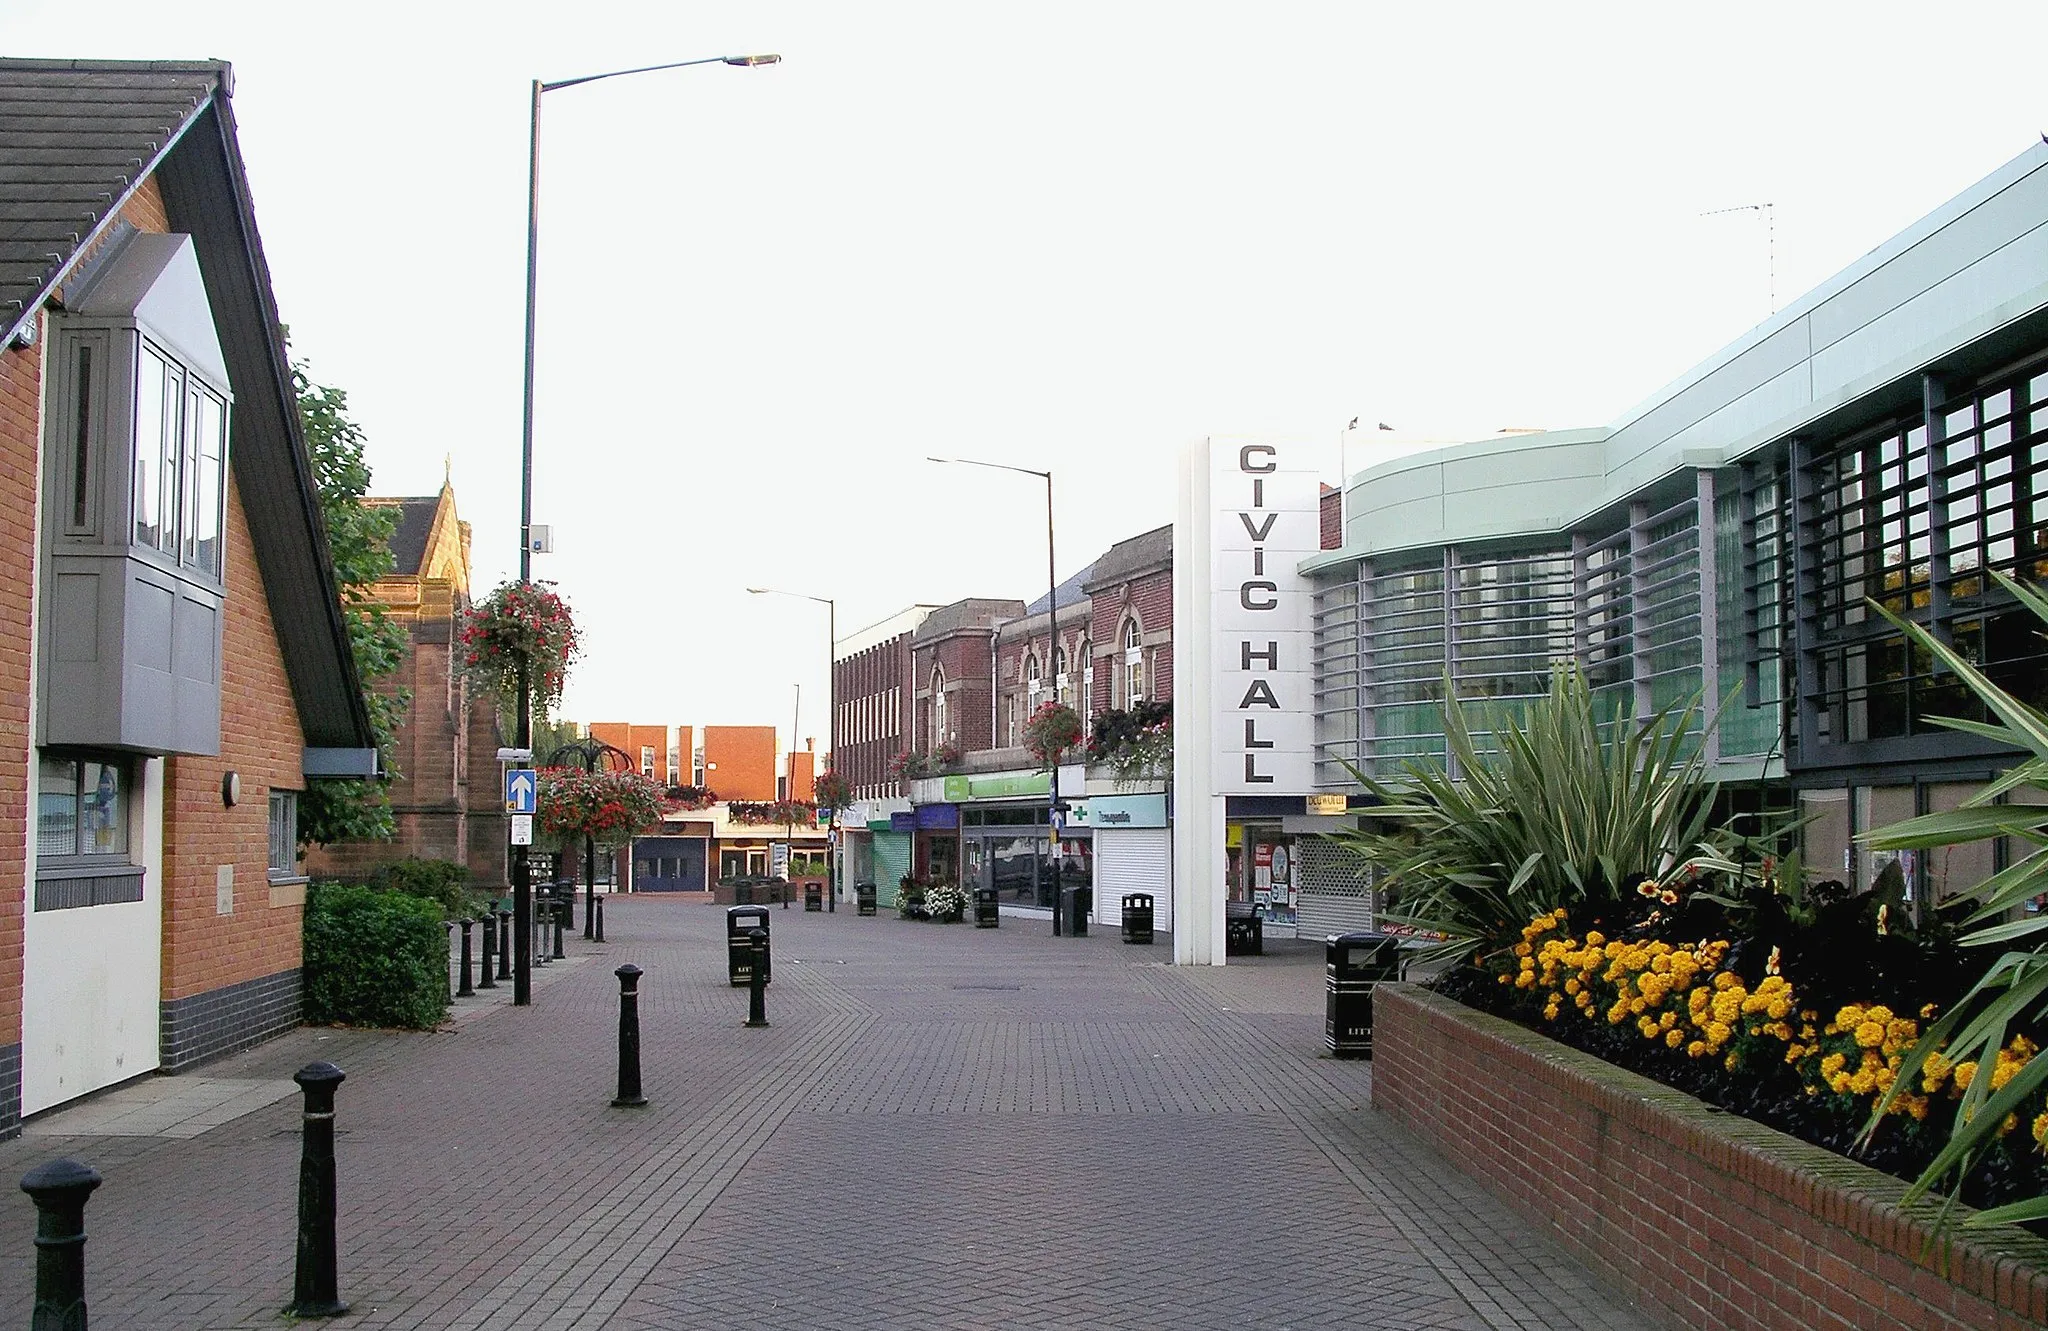 Photo showing: Bedworth town centre including the Civic Centre, Warwickshire, England.